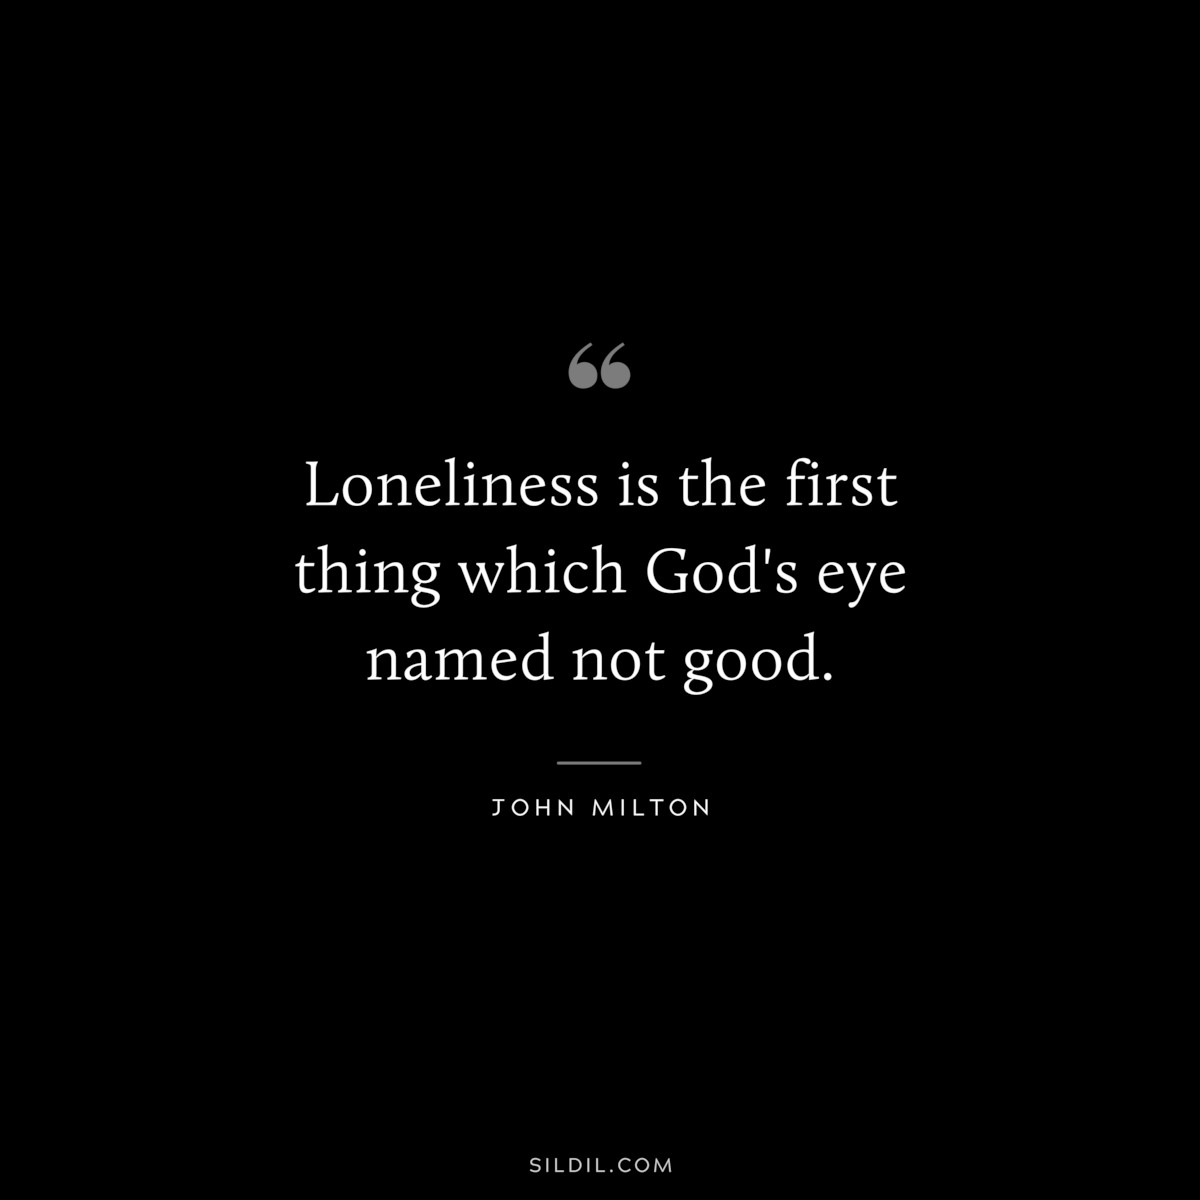 Loneliness is the first thing which God's eye named not good. ― John Milton